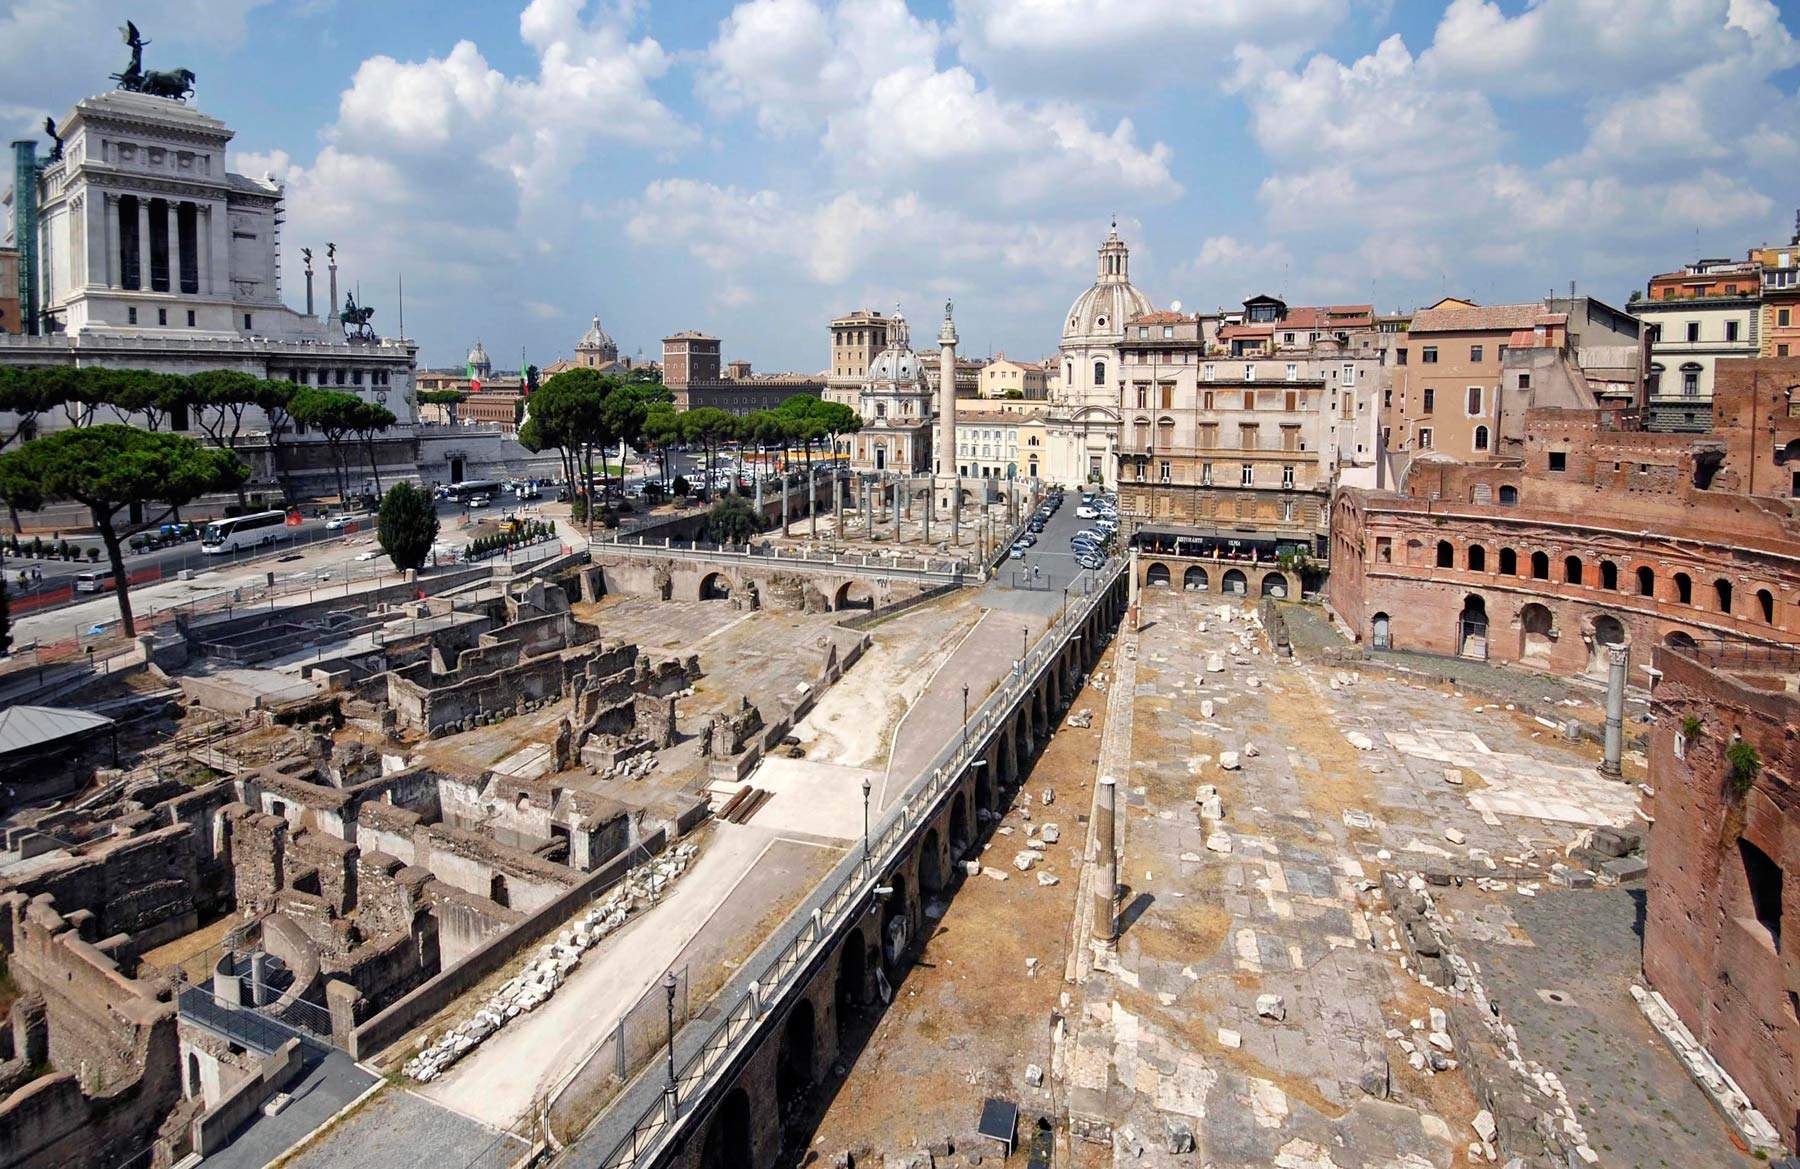 Rome, a new portion of the Imperial Fora emerges, with important discoveries